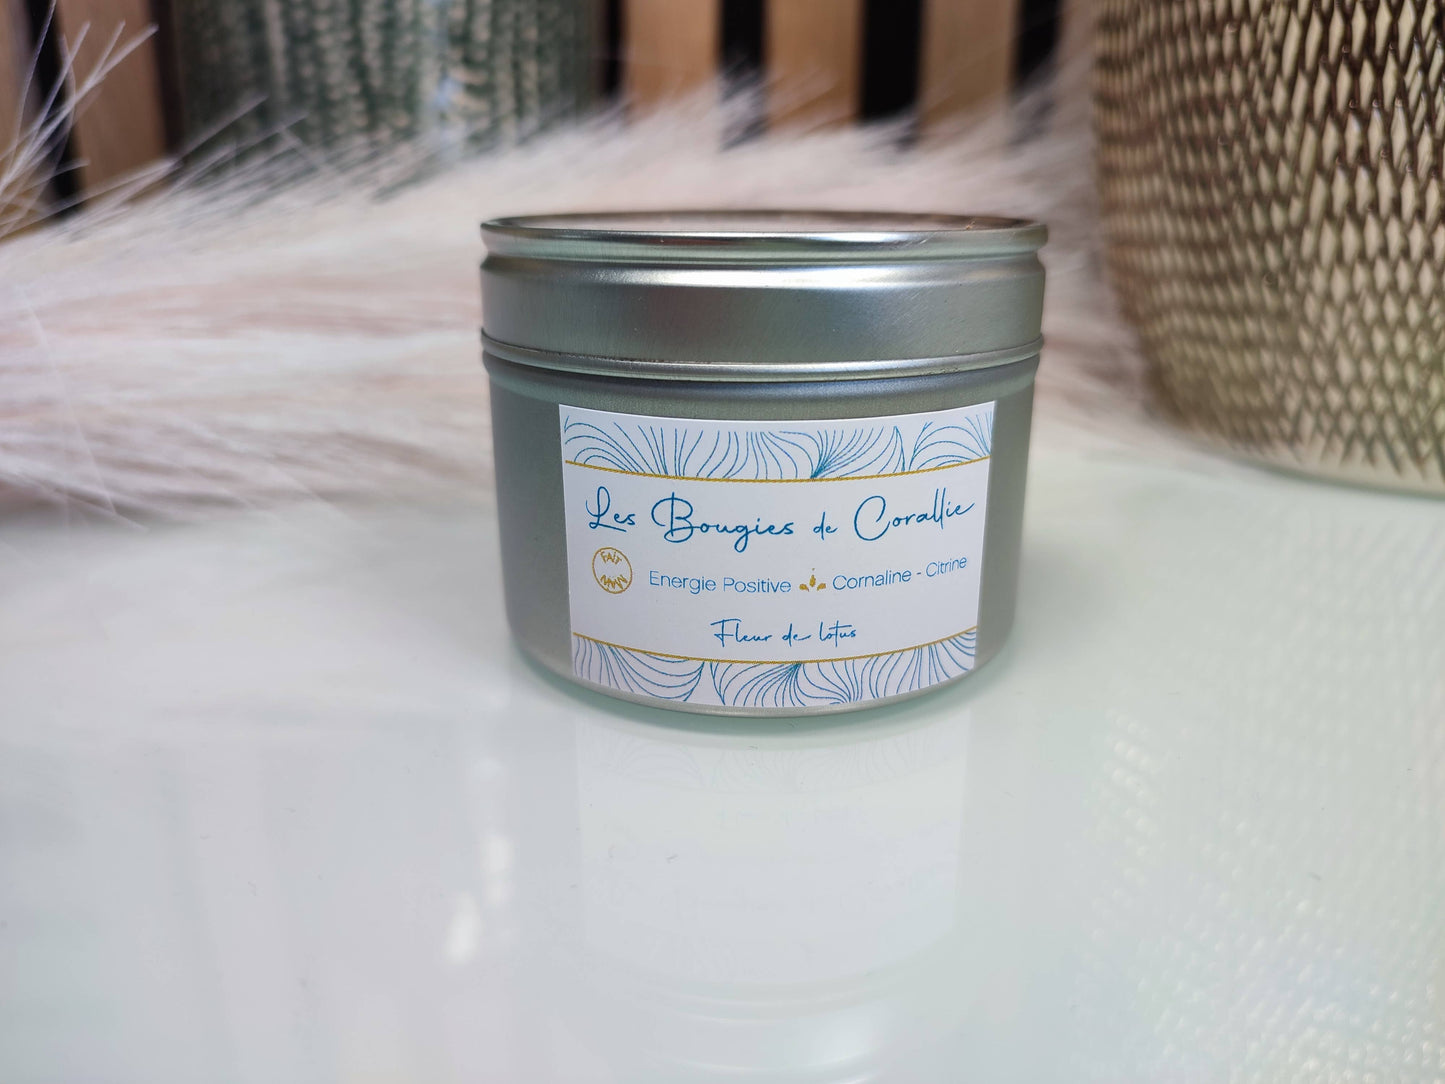 Positive energy scented candle with natural stones